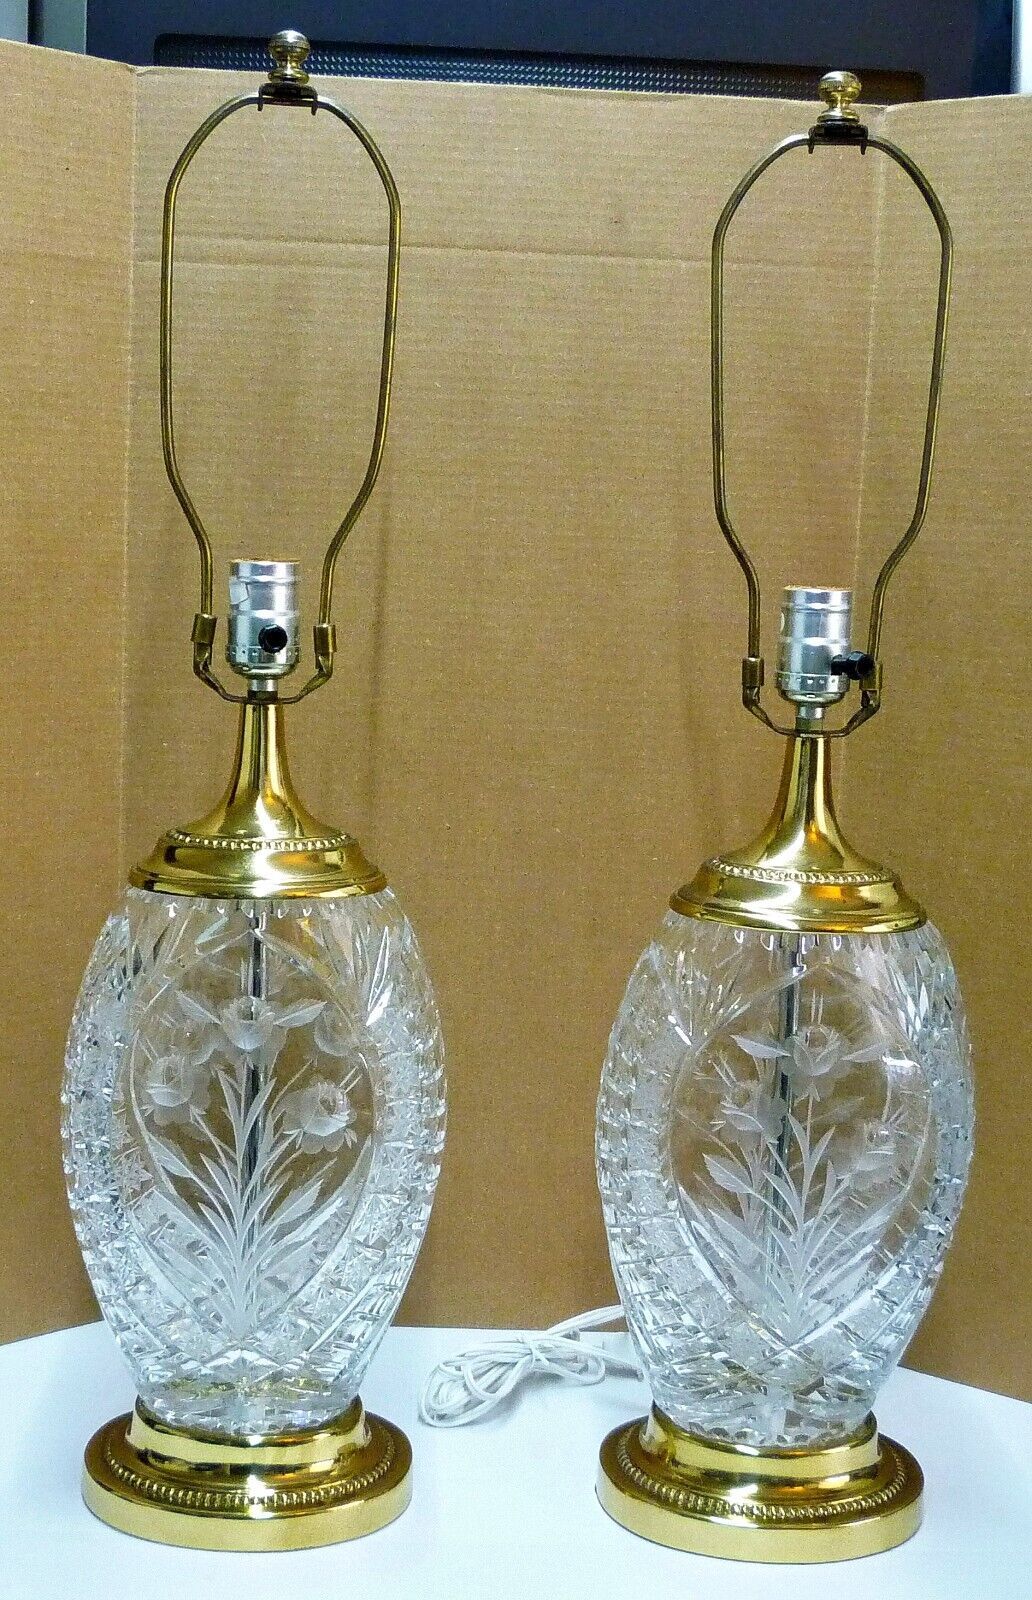 Exquisite Pair of Ornate, Vintage Floral Design Dresden Lead Crystal Table Lamps